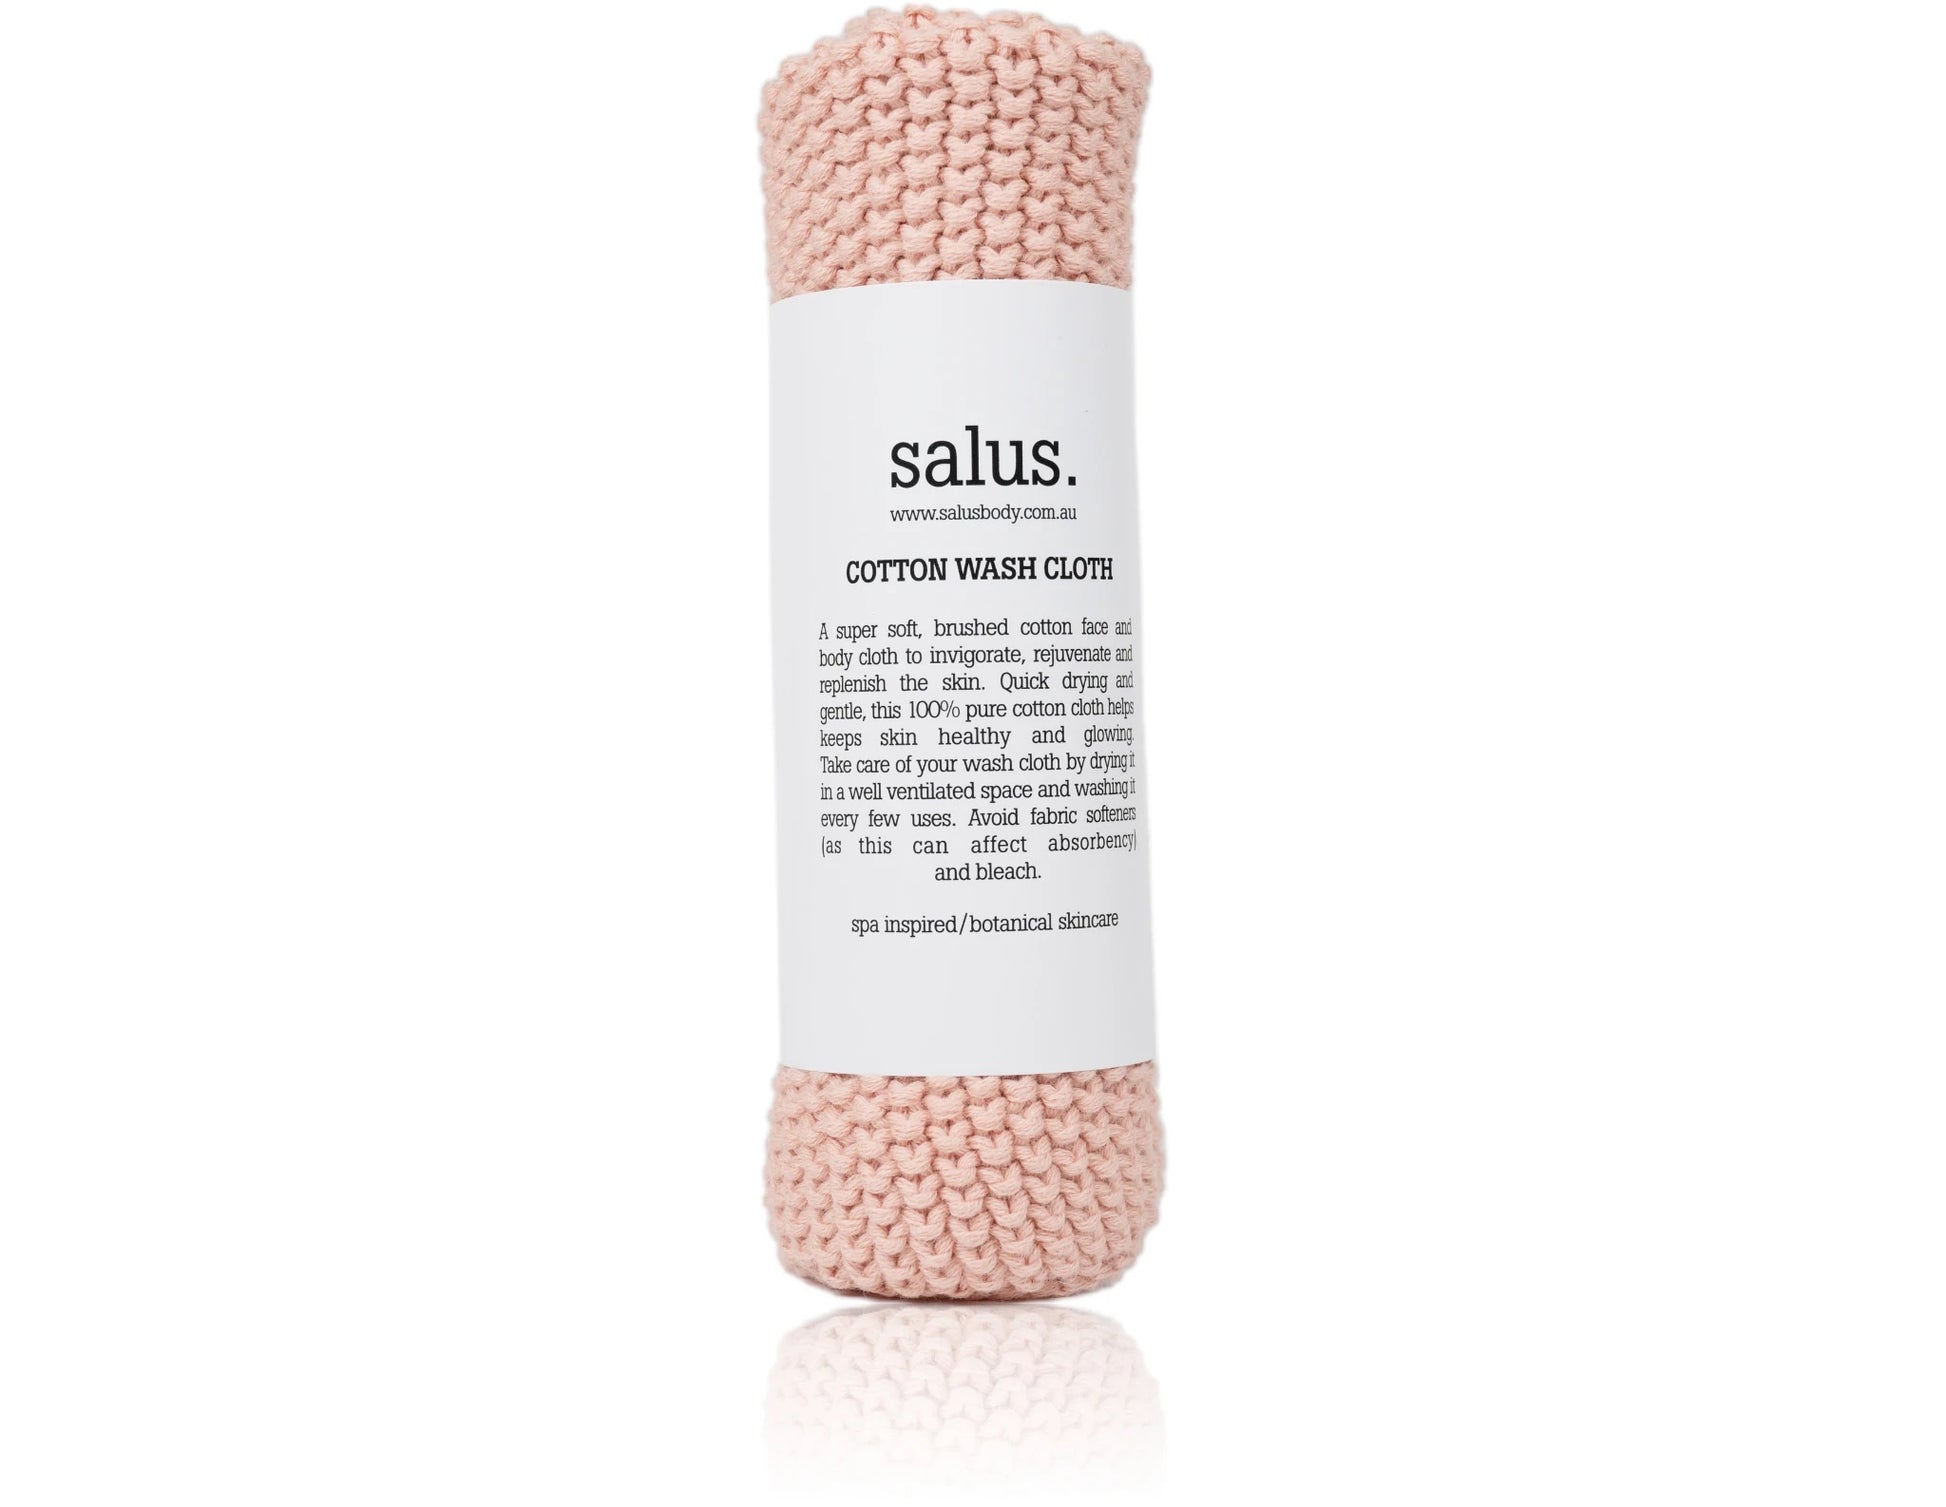 Packaged pink cotton wash cloth from Salus